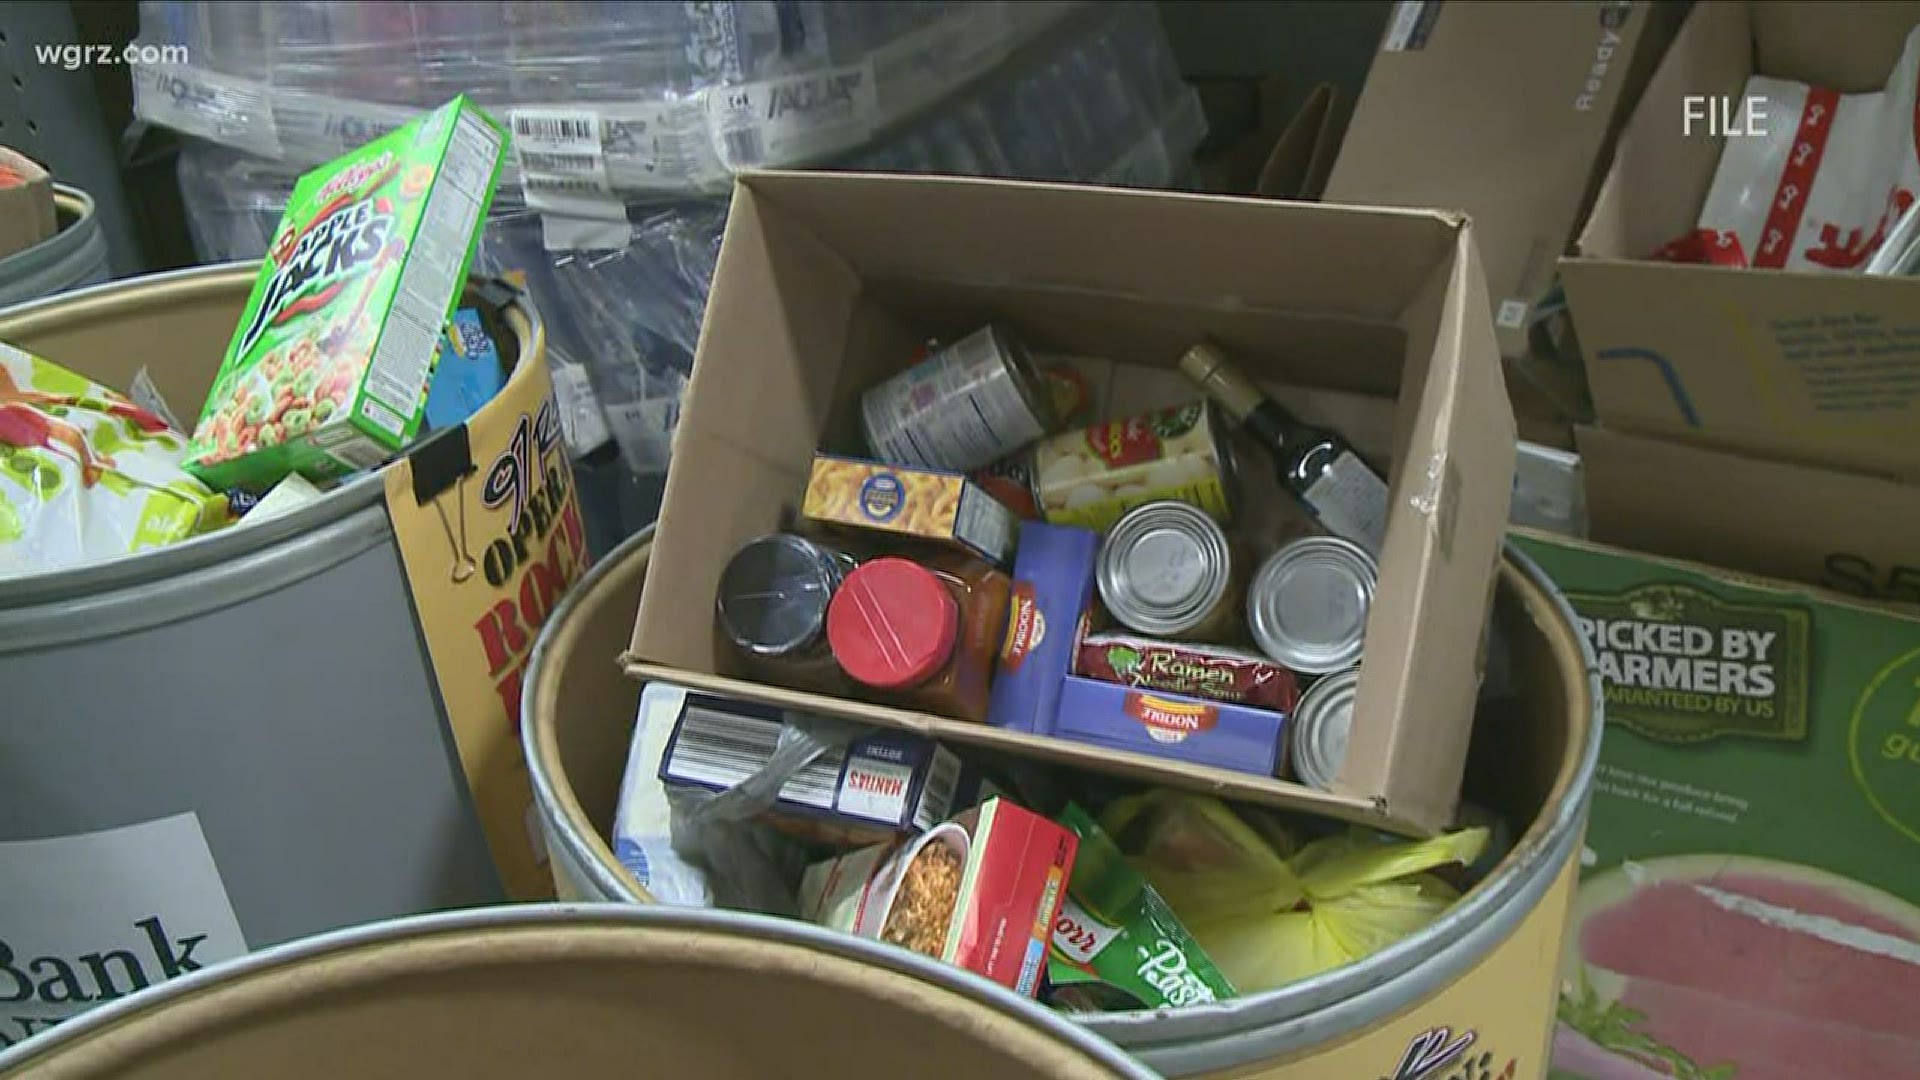 The organization has been asking people to host no-contact food drives and make virtual donations.